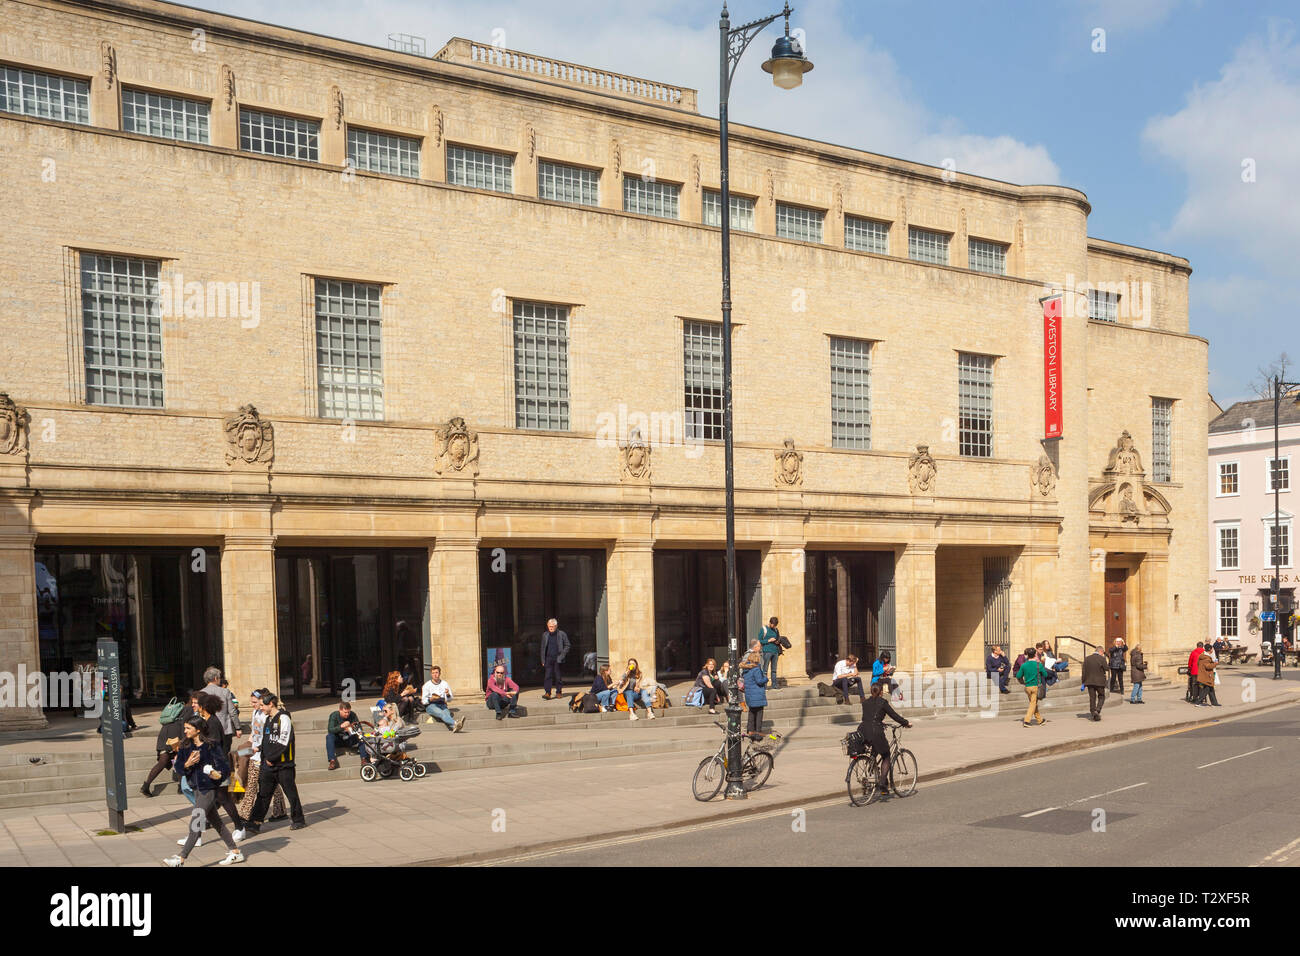 The Weston Library in Broad Street, Oxford Stock Photo